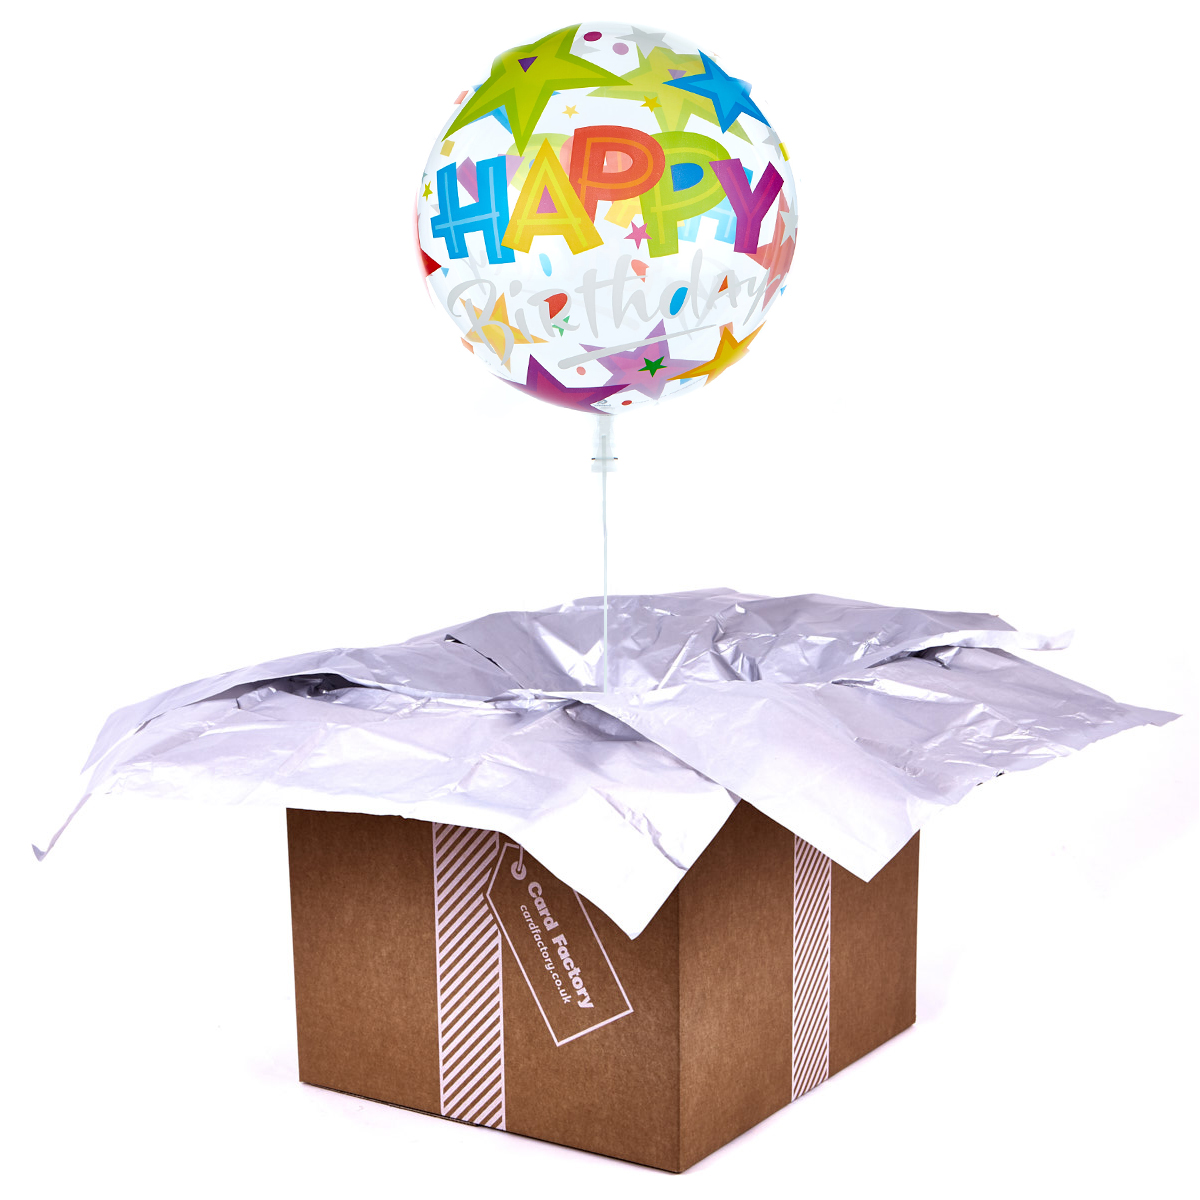 22-Inch Bubble Balloon - Happy Birthday, Stars - DELIVERED INFLATED!